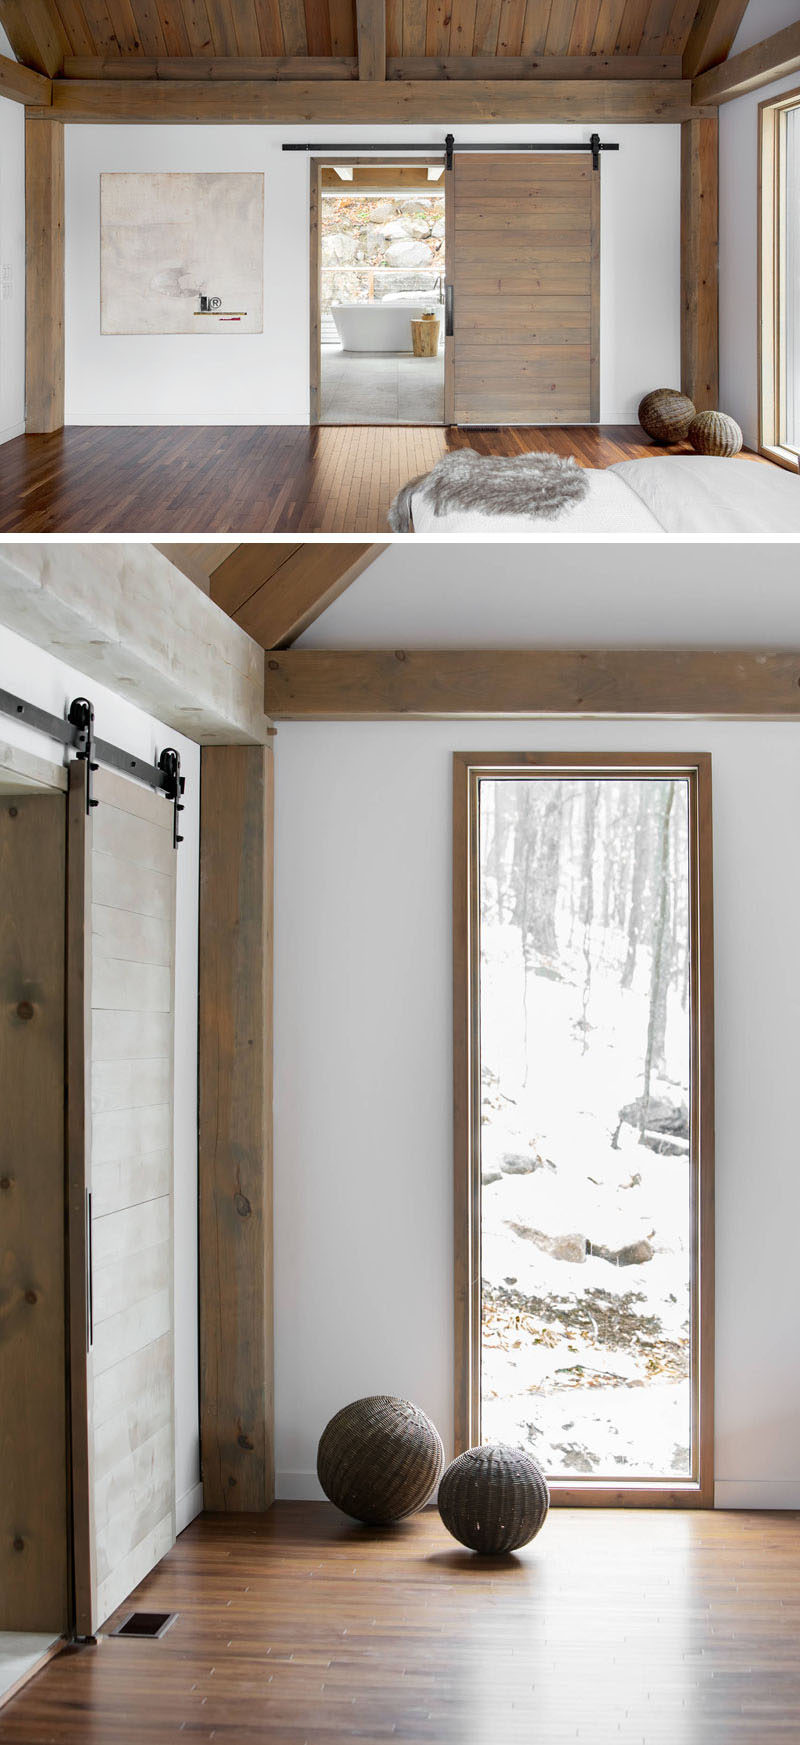 In keeping with the rustic yet modern feel of the bedroom, a sliding barn door separates the bedroom from the ensuite bathroom.